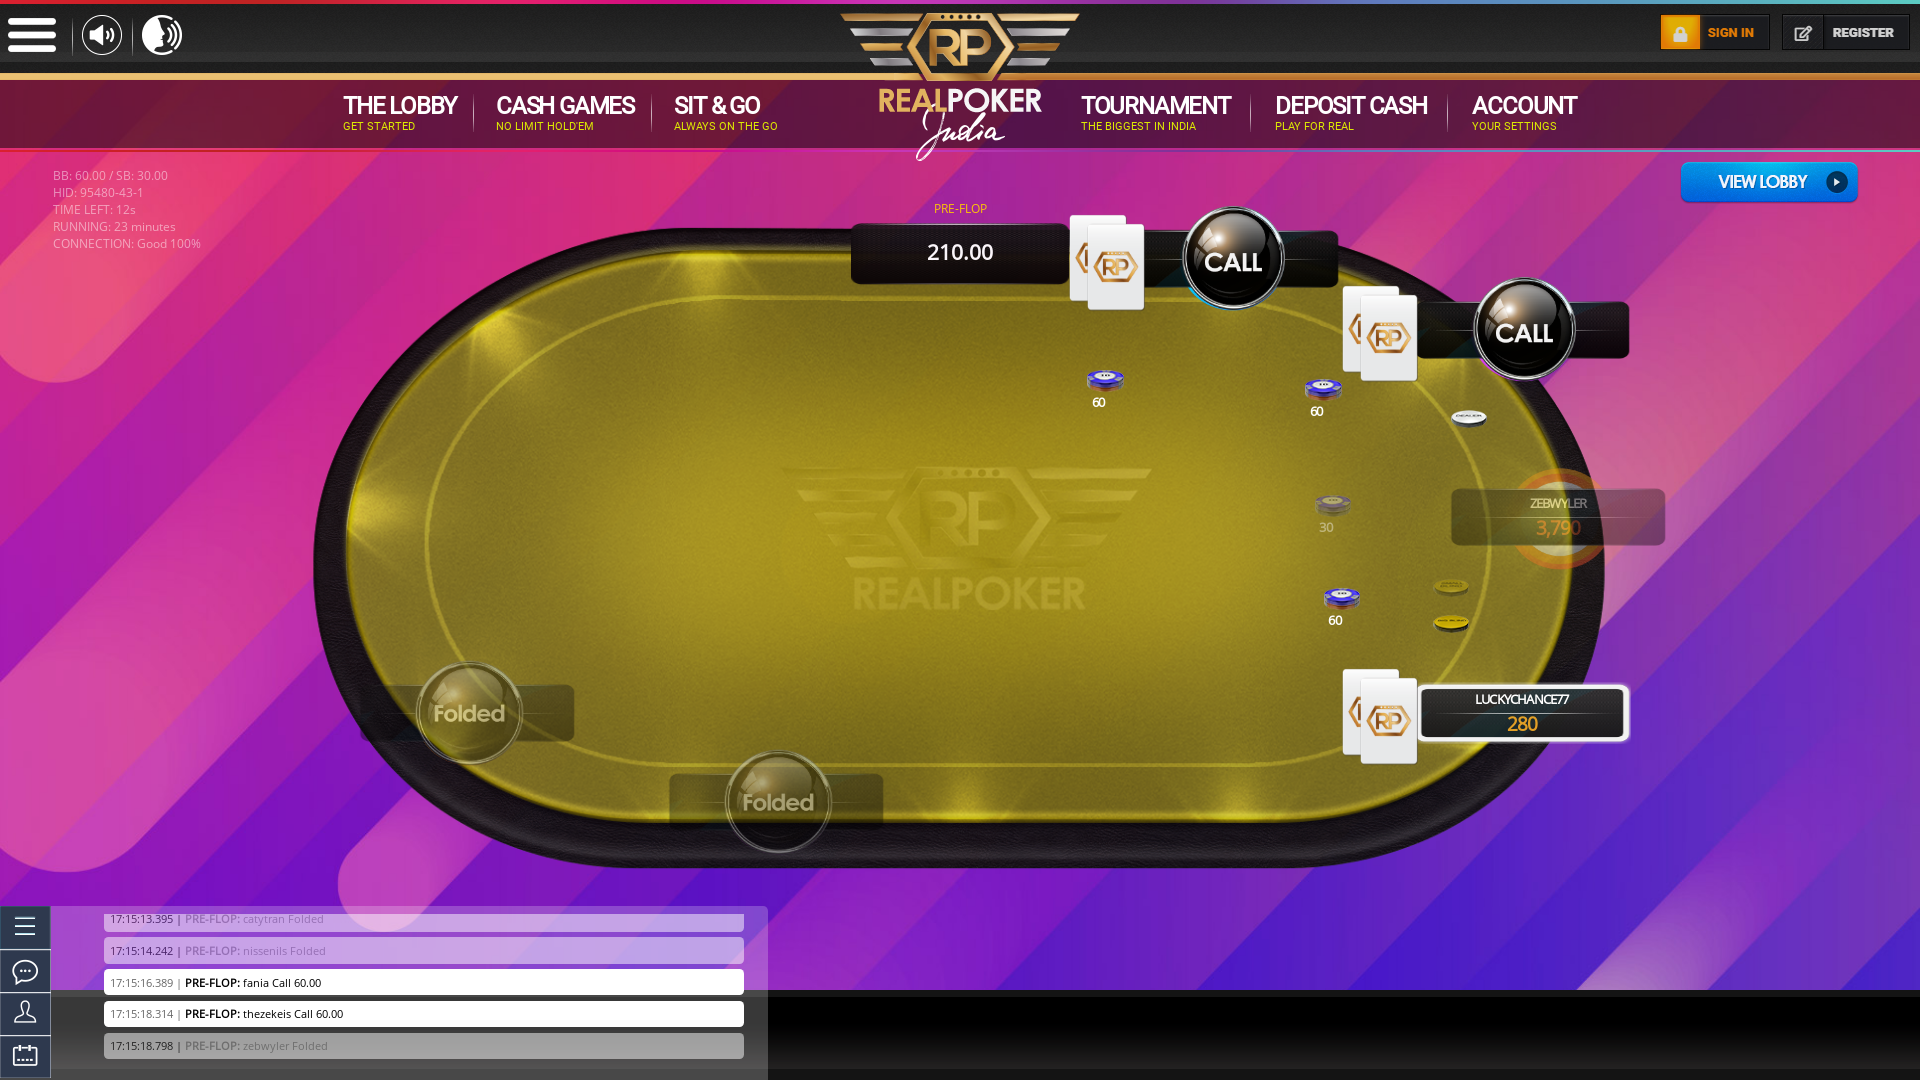 Salcette texas holdem poker table on a 10 player table in the 23rd minute of the game